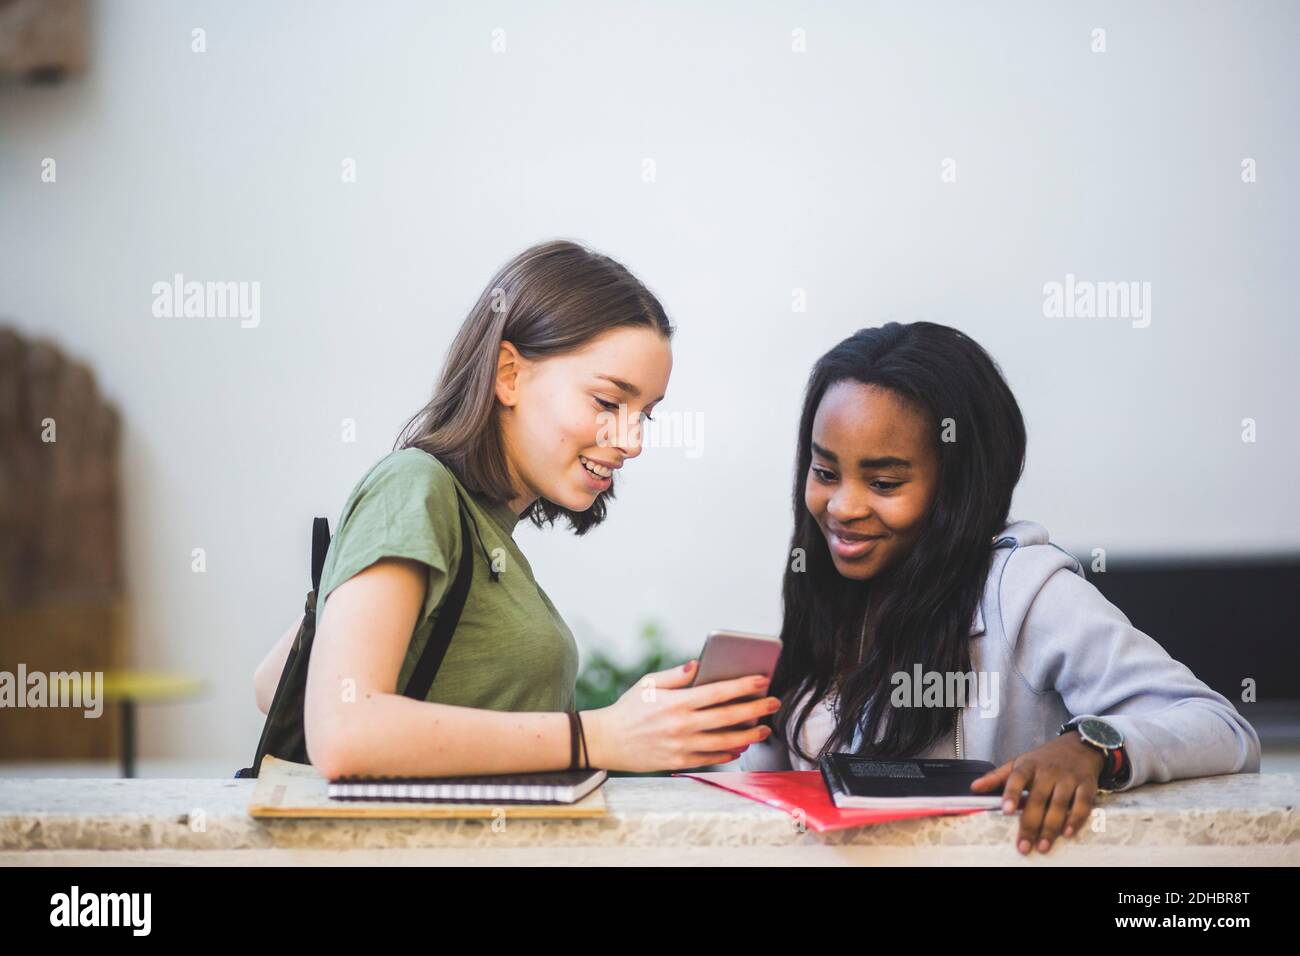 Smiling multi-ethnic female students sharing smart phone while standing in corridor at high school Stock Photo